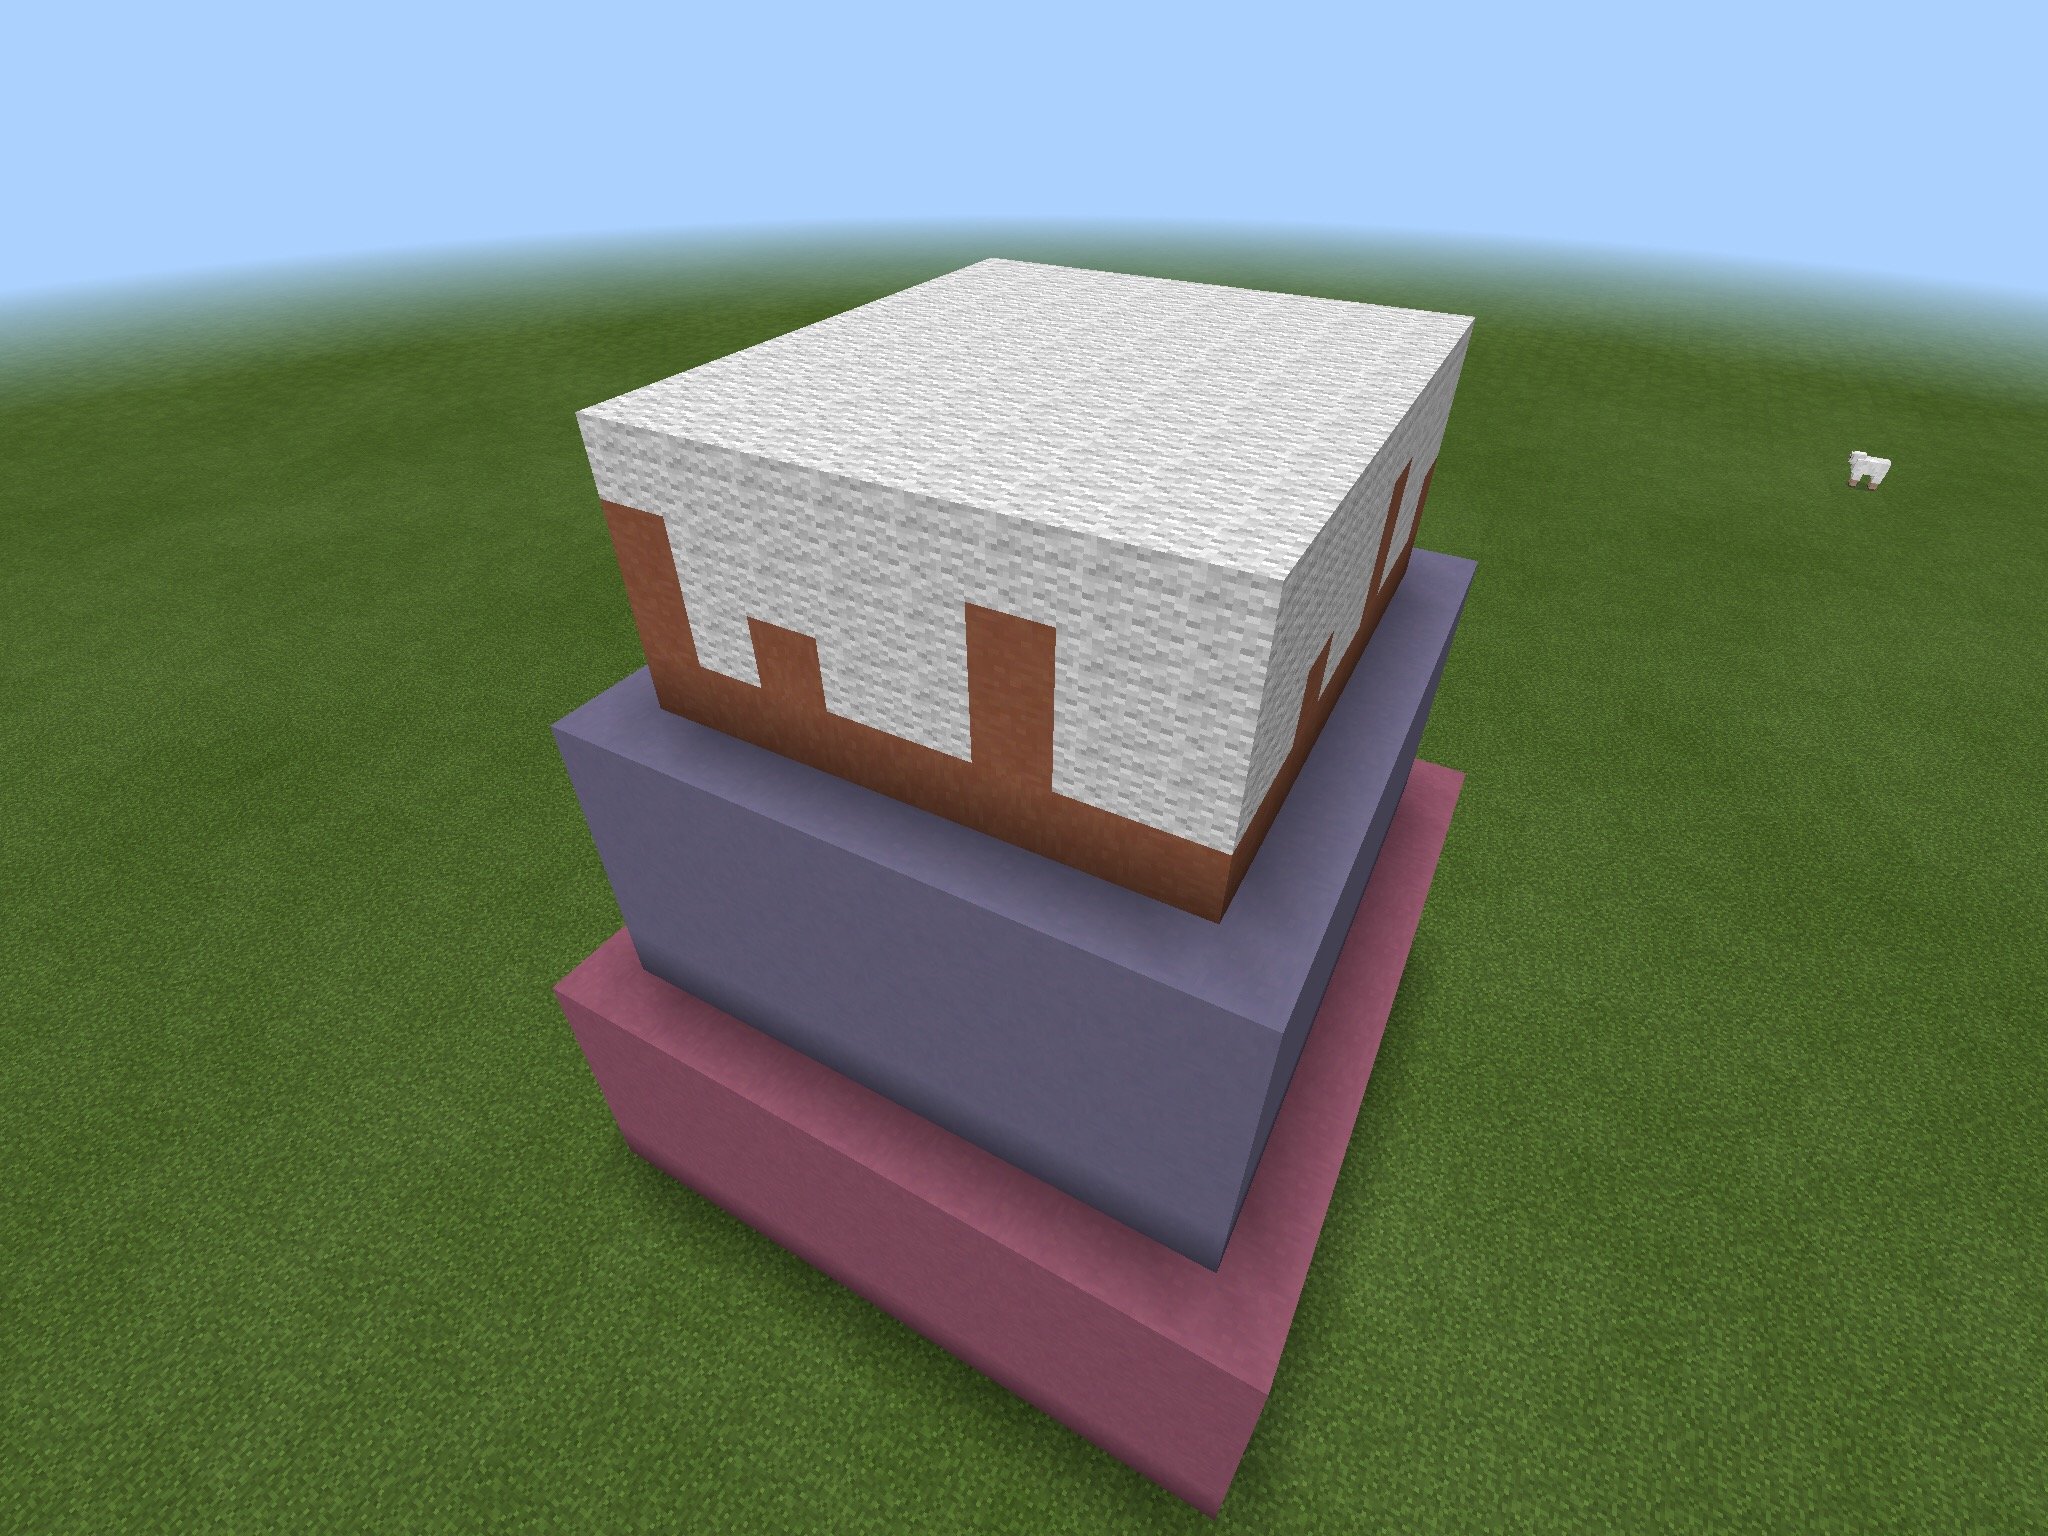 How to create a cake house on minecraft! - B+C Guides